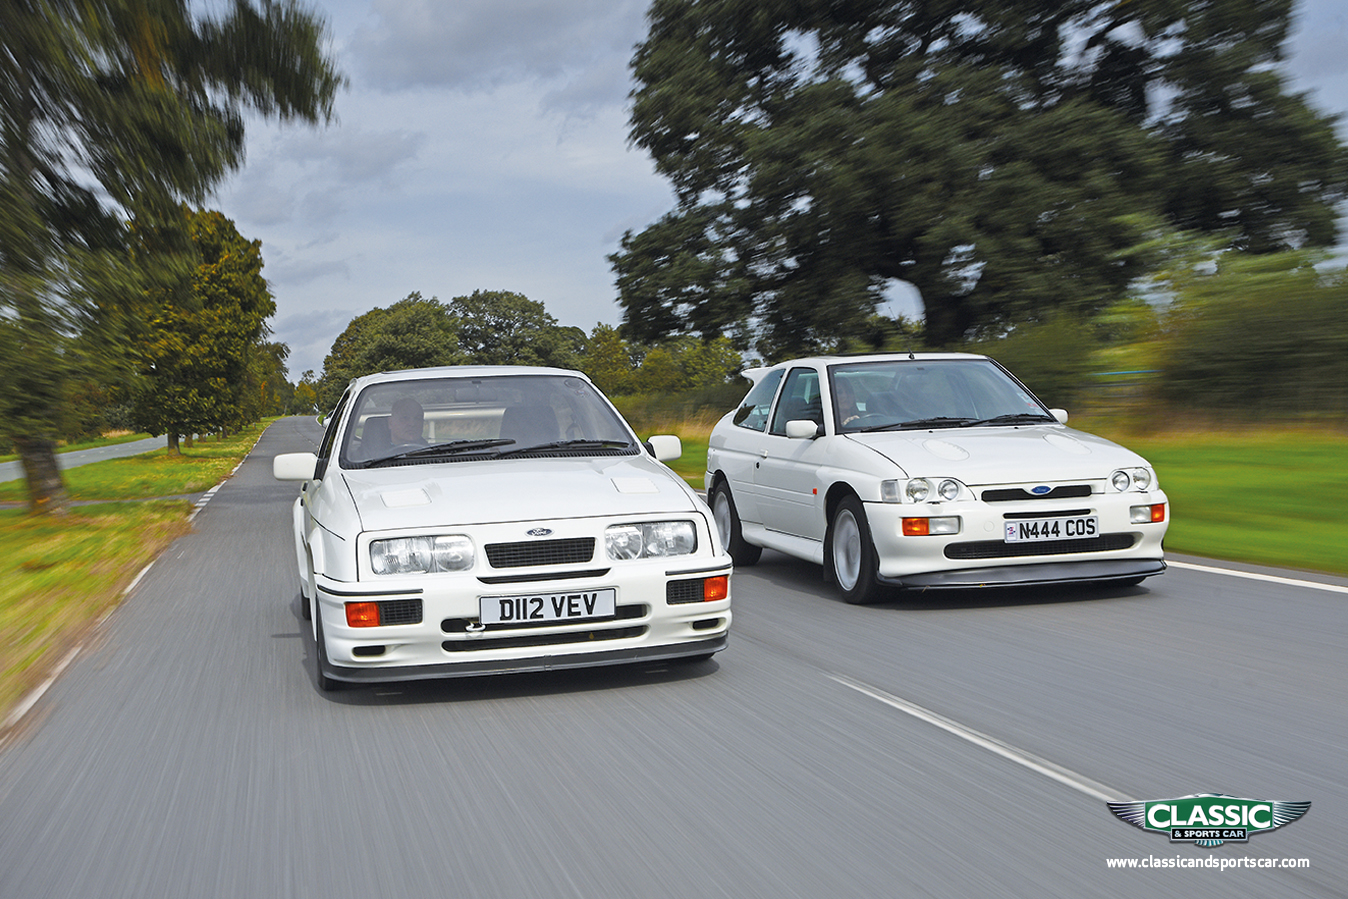 Ford Sierra Rs Wallpapers